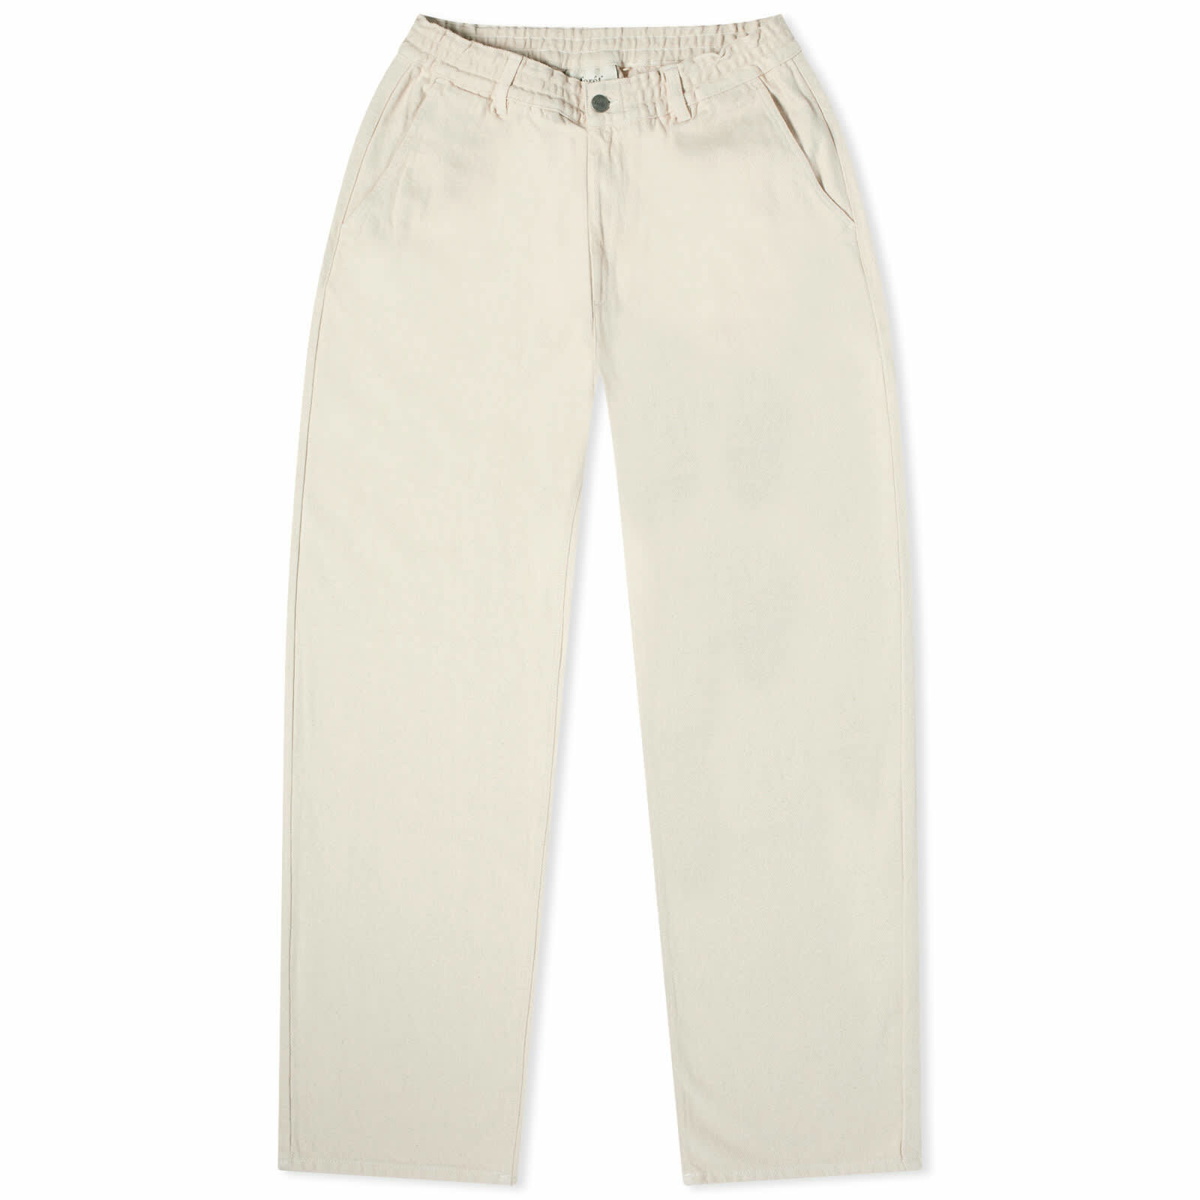 Photo: Foret Men's Arise Twill Pants in Undyed